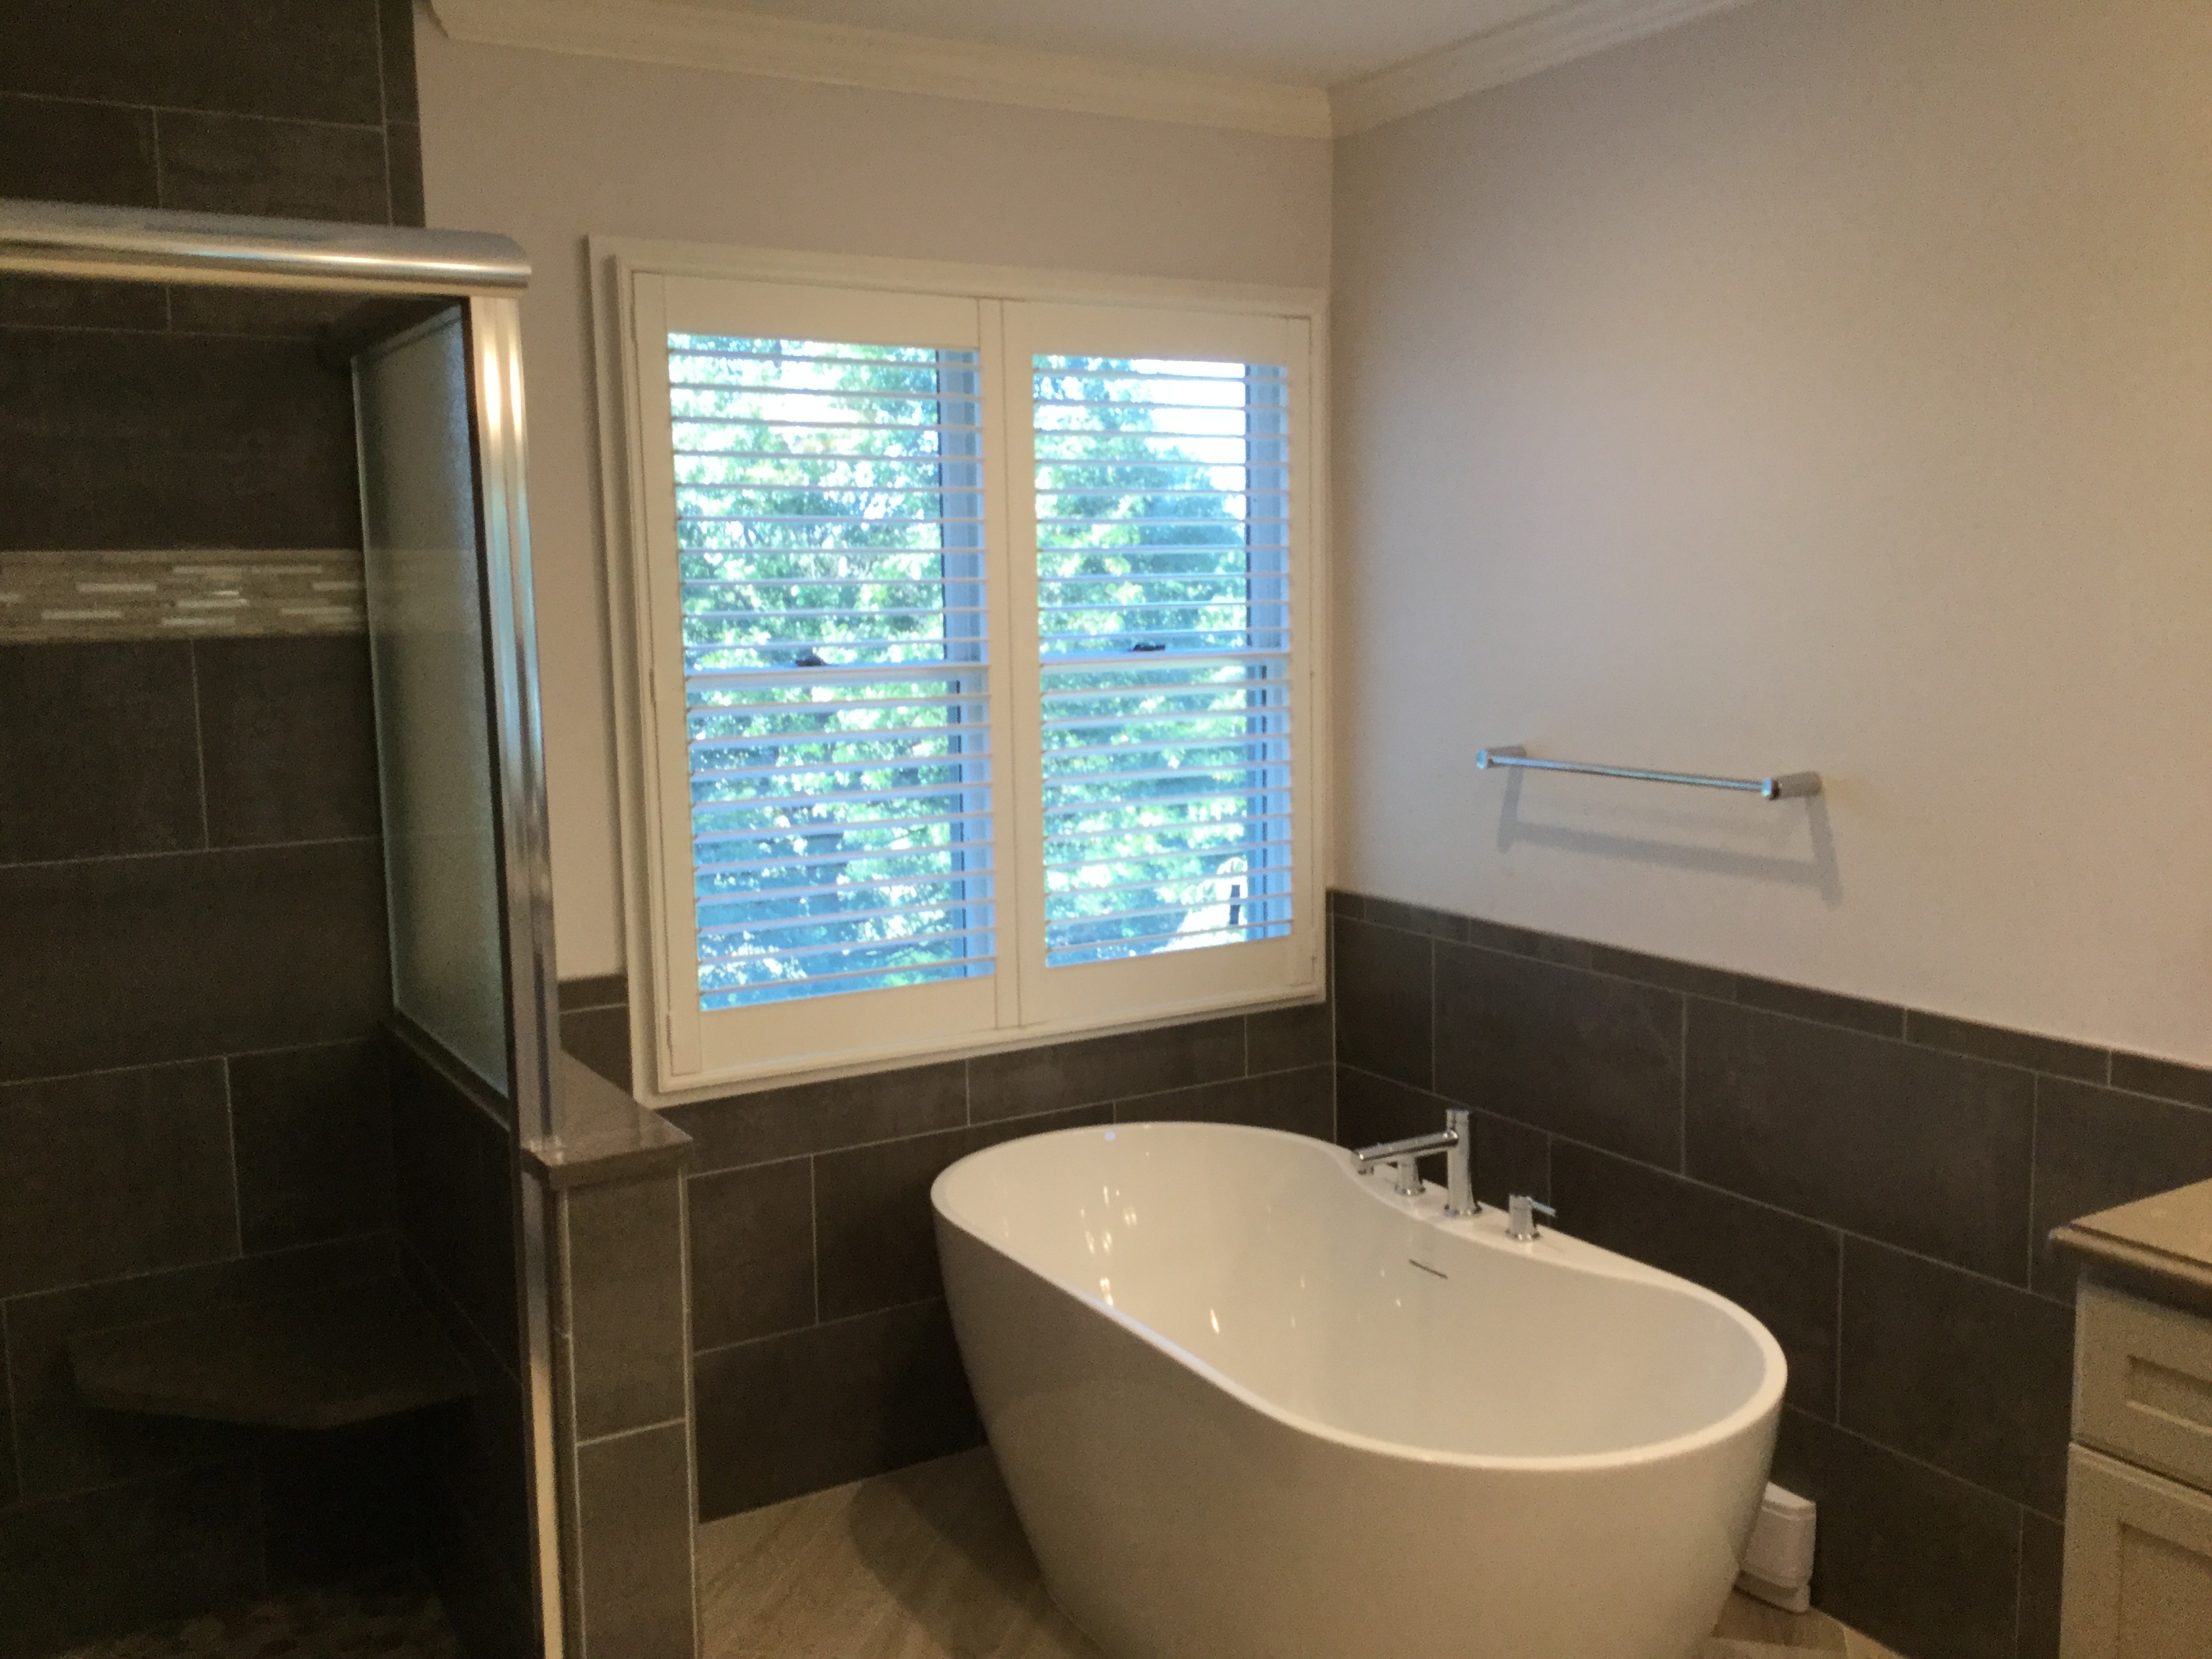 Interior Shutters by Budget Blinds of Phillipsburg compliment this classic designed bathroom so well. They add a simple touch of timeless beauty while allowing you to enjoy optimal privacy!  BudgetBlindsPhillipsburg  ShutterattheBeauty  FreeConsultation  InteriorShutters